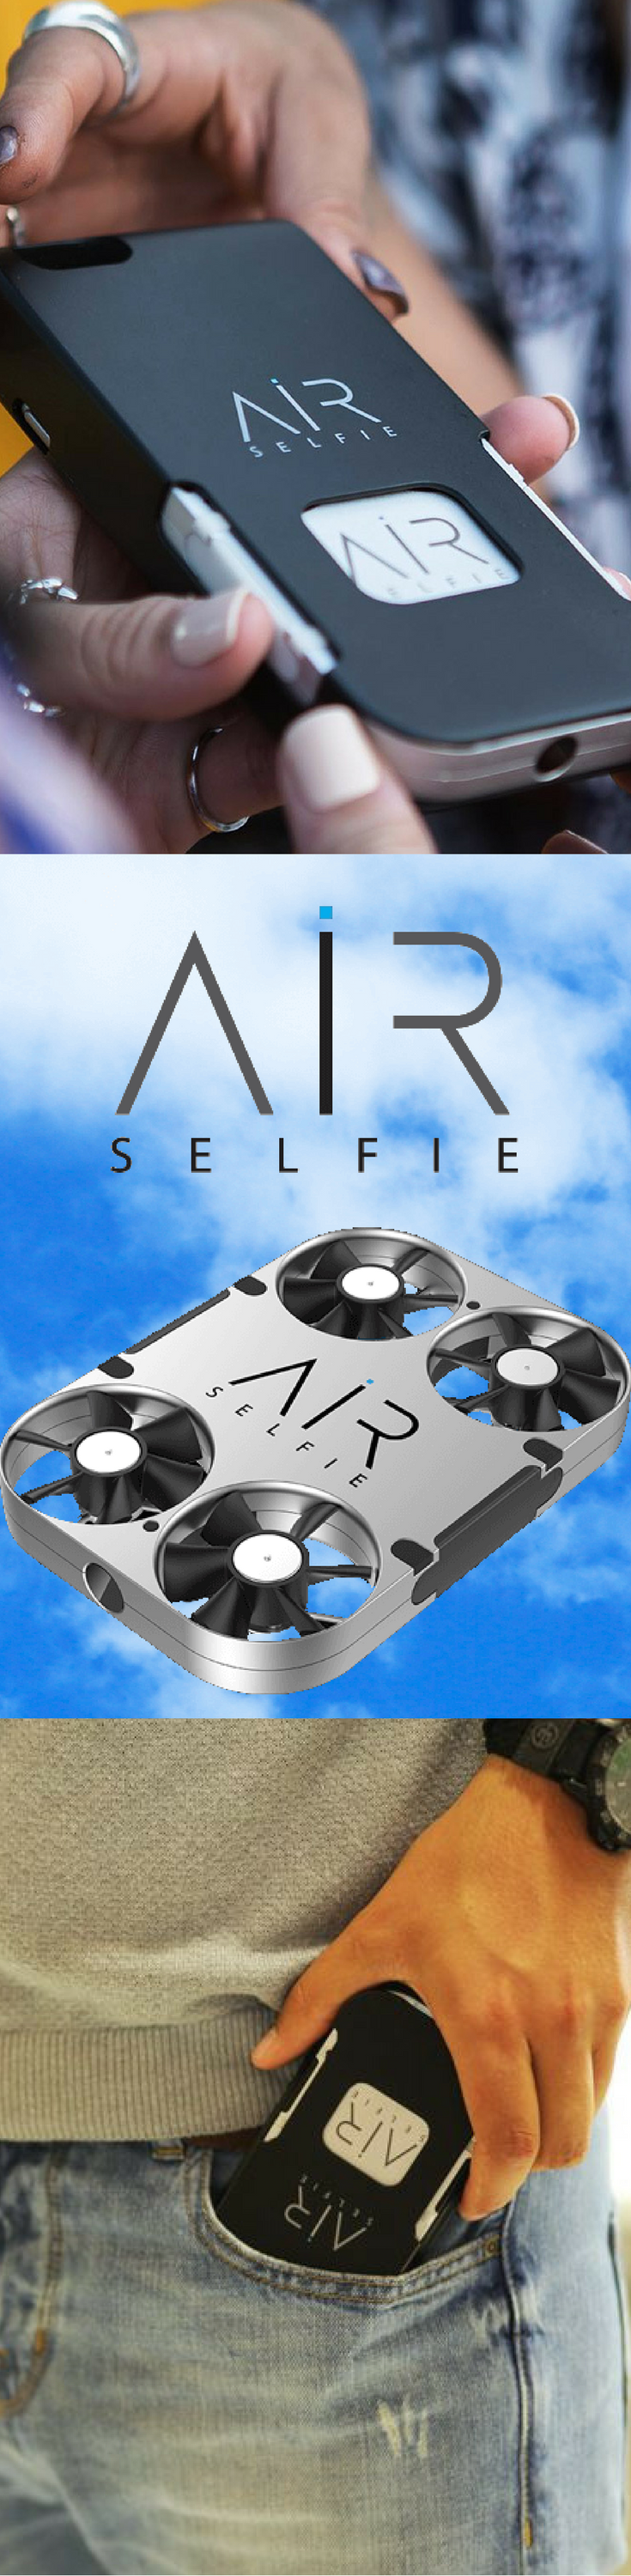 AirSelfie Drone with Cover Will fit iPhone 7 Plus Black